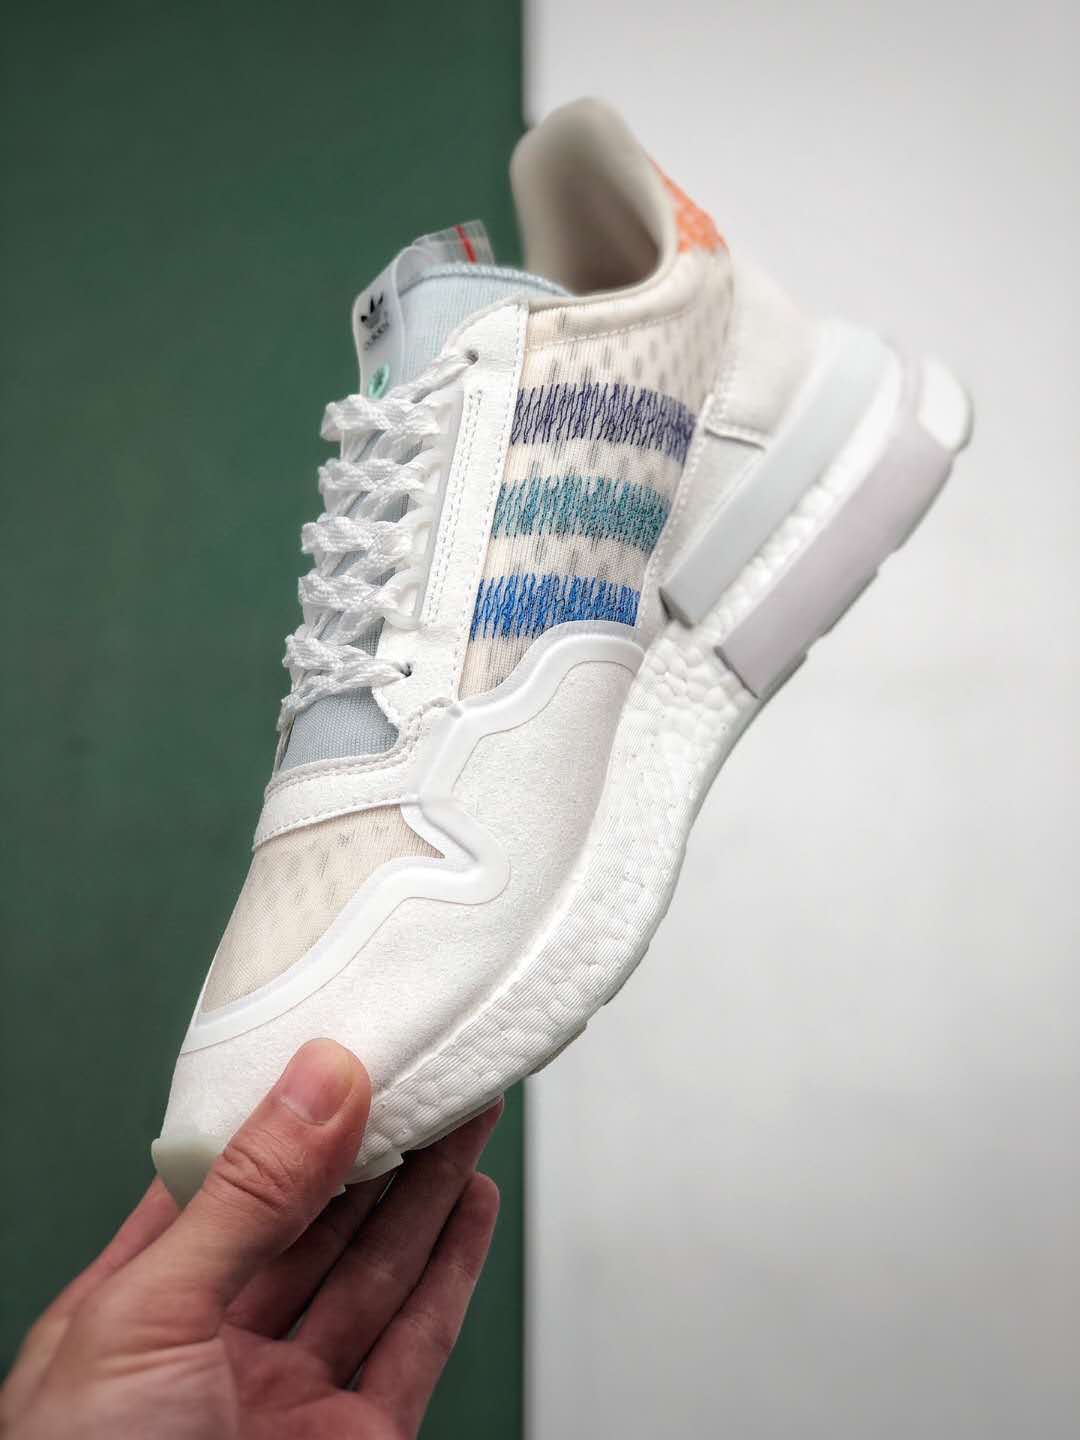 Adidas Commonwealth x ZX 500 RM Coastal Living DB3510 - Limited Edition Sneakers